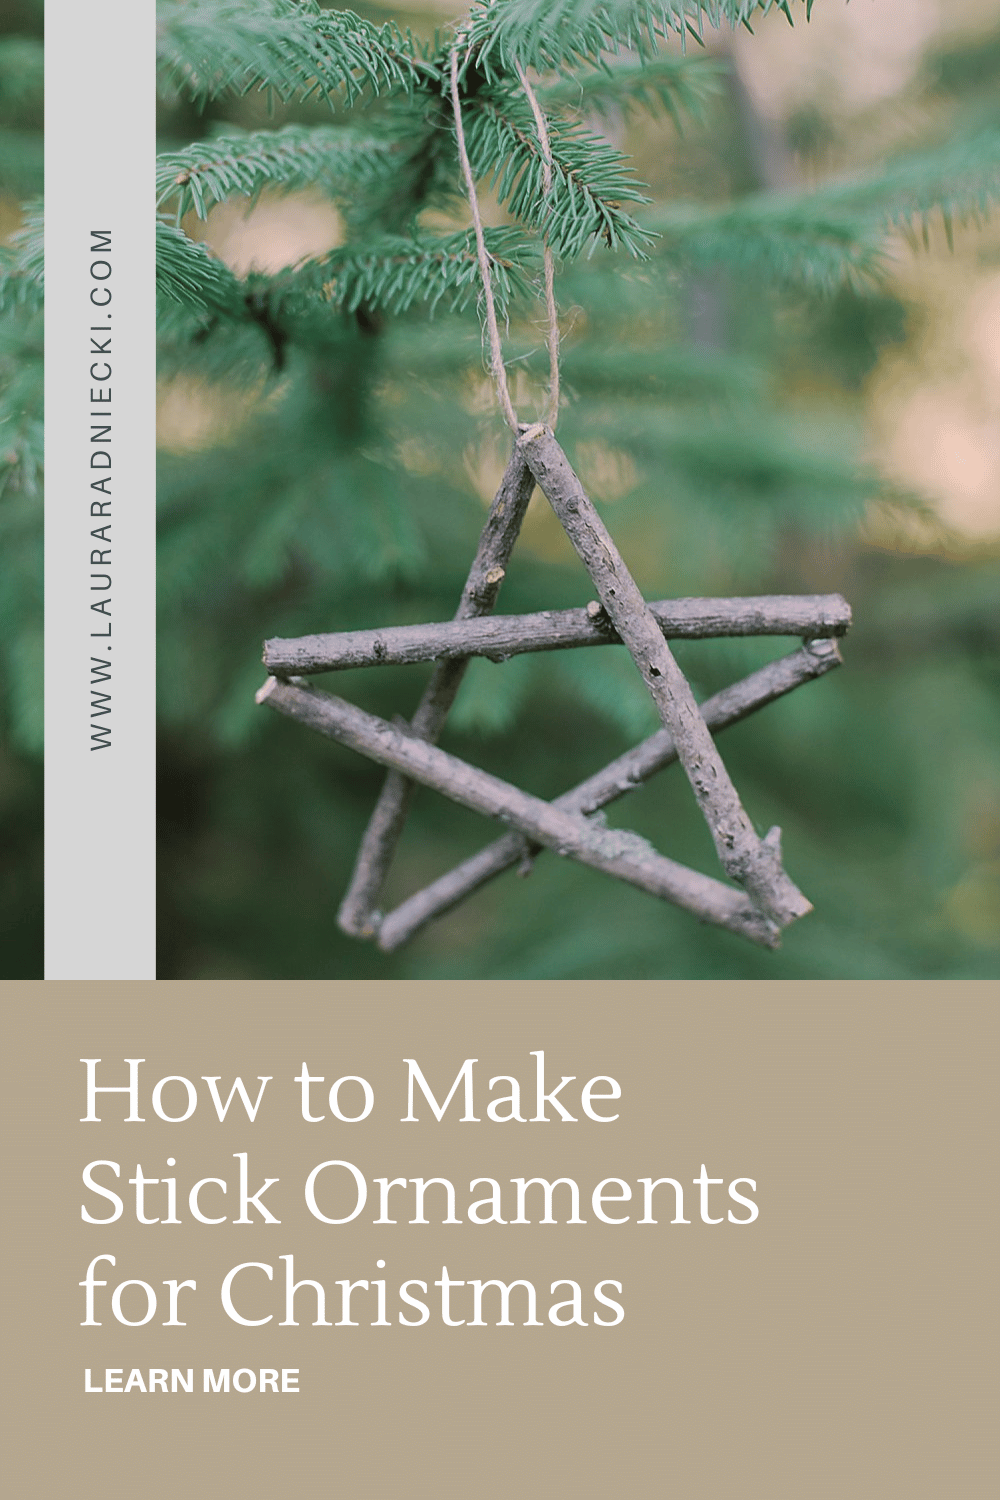 Stick Ornaments DIY all you need is wire, yarn, scissors, and glue